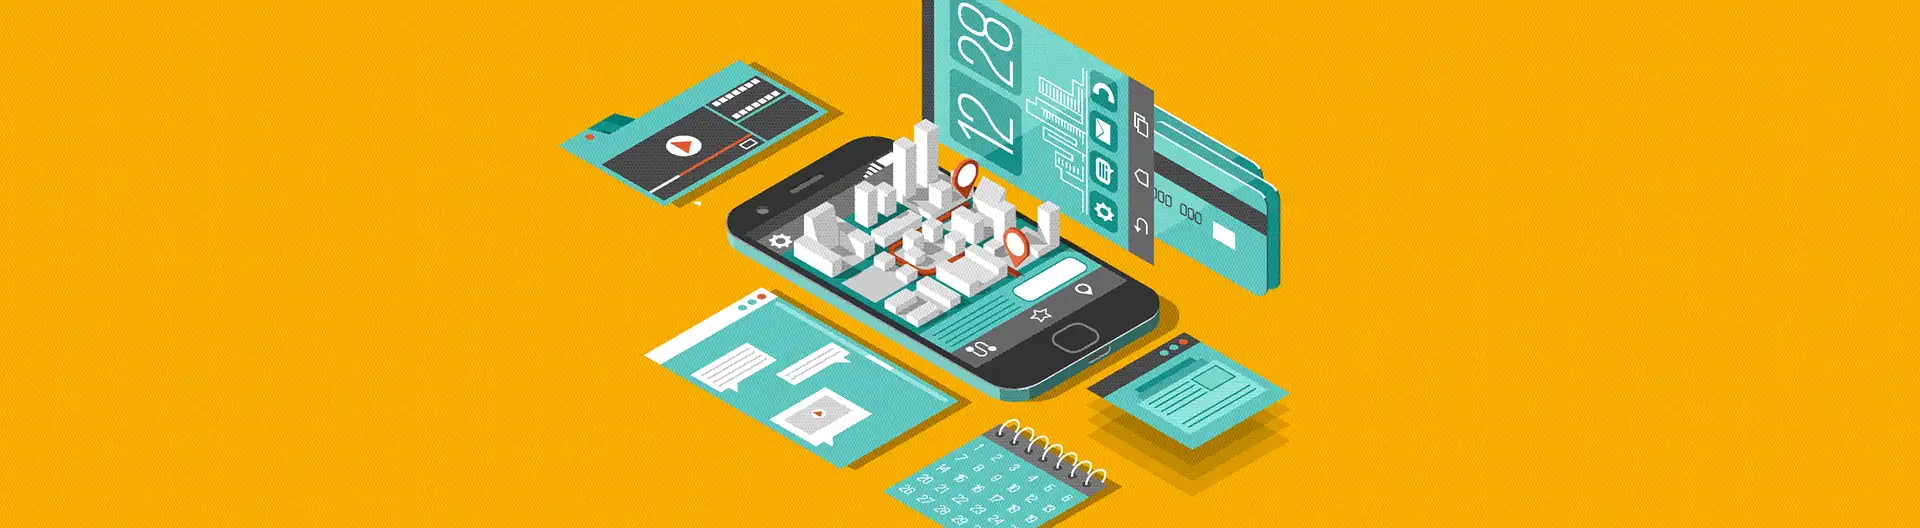 Mobile App Internationalization: Ways and Methods to Boost Revenue by 26% - Banner